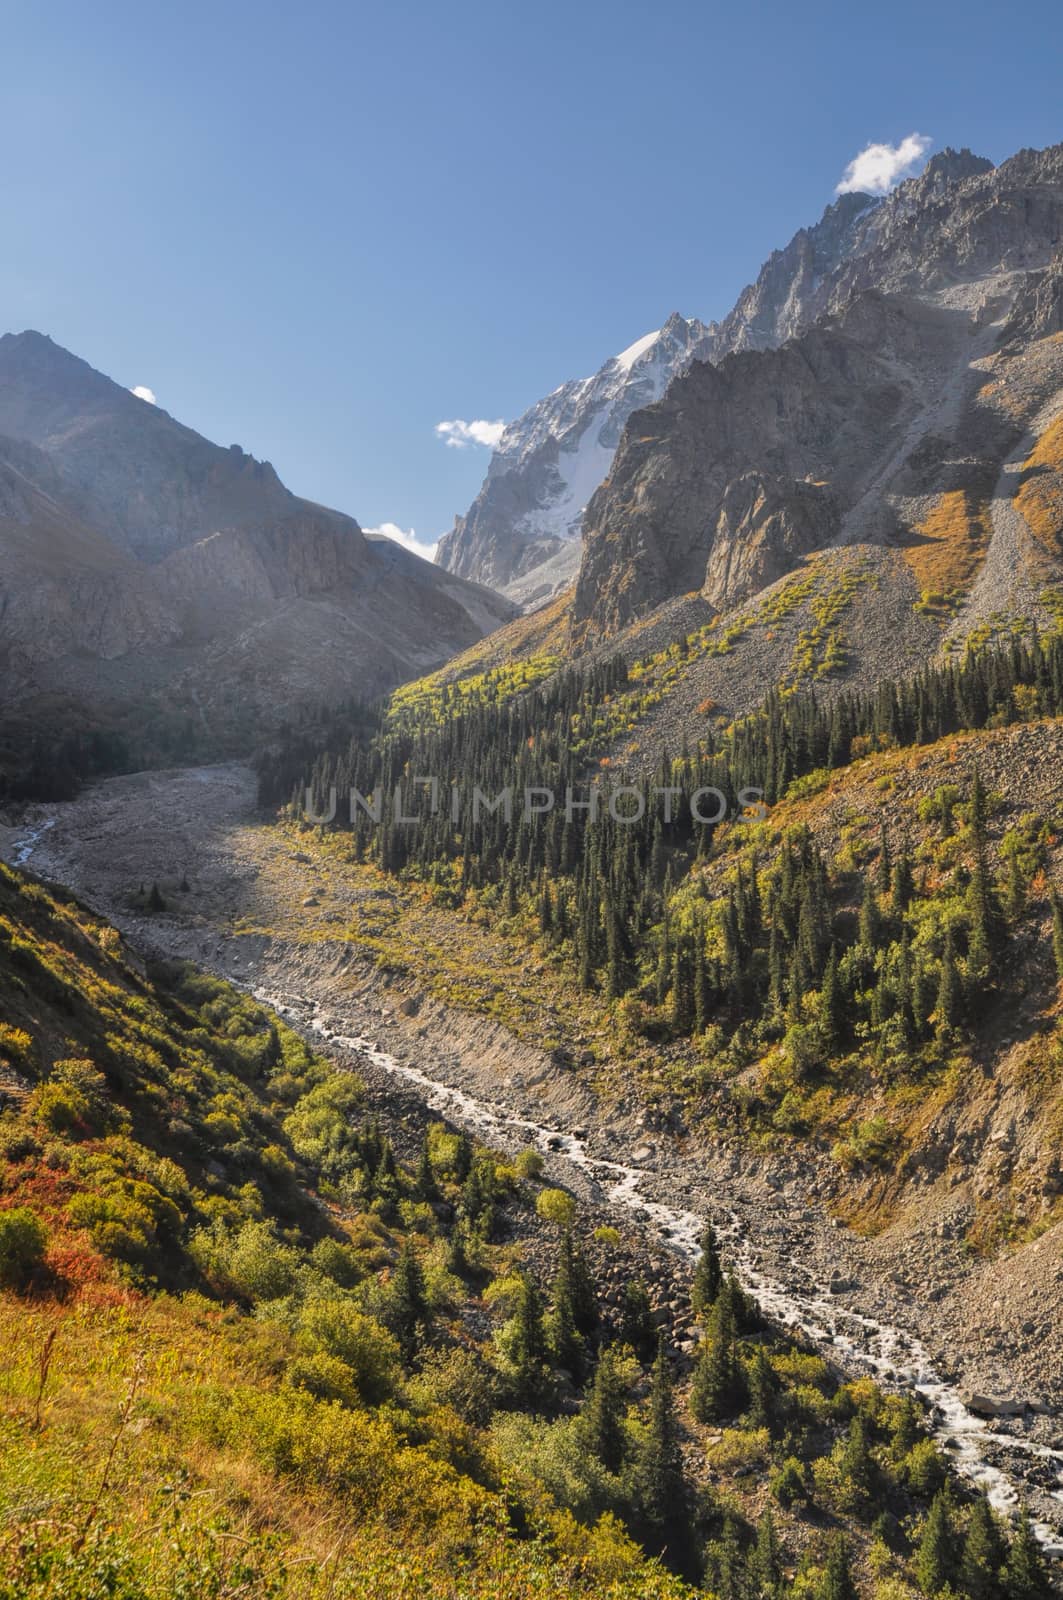 Scenic valley in Ala Archa national park in Tian Shan mountain range in Kyrgyzstan